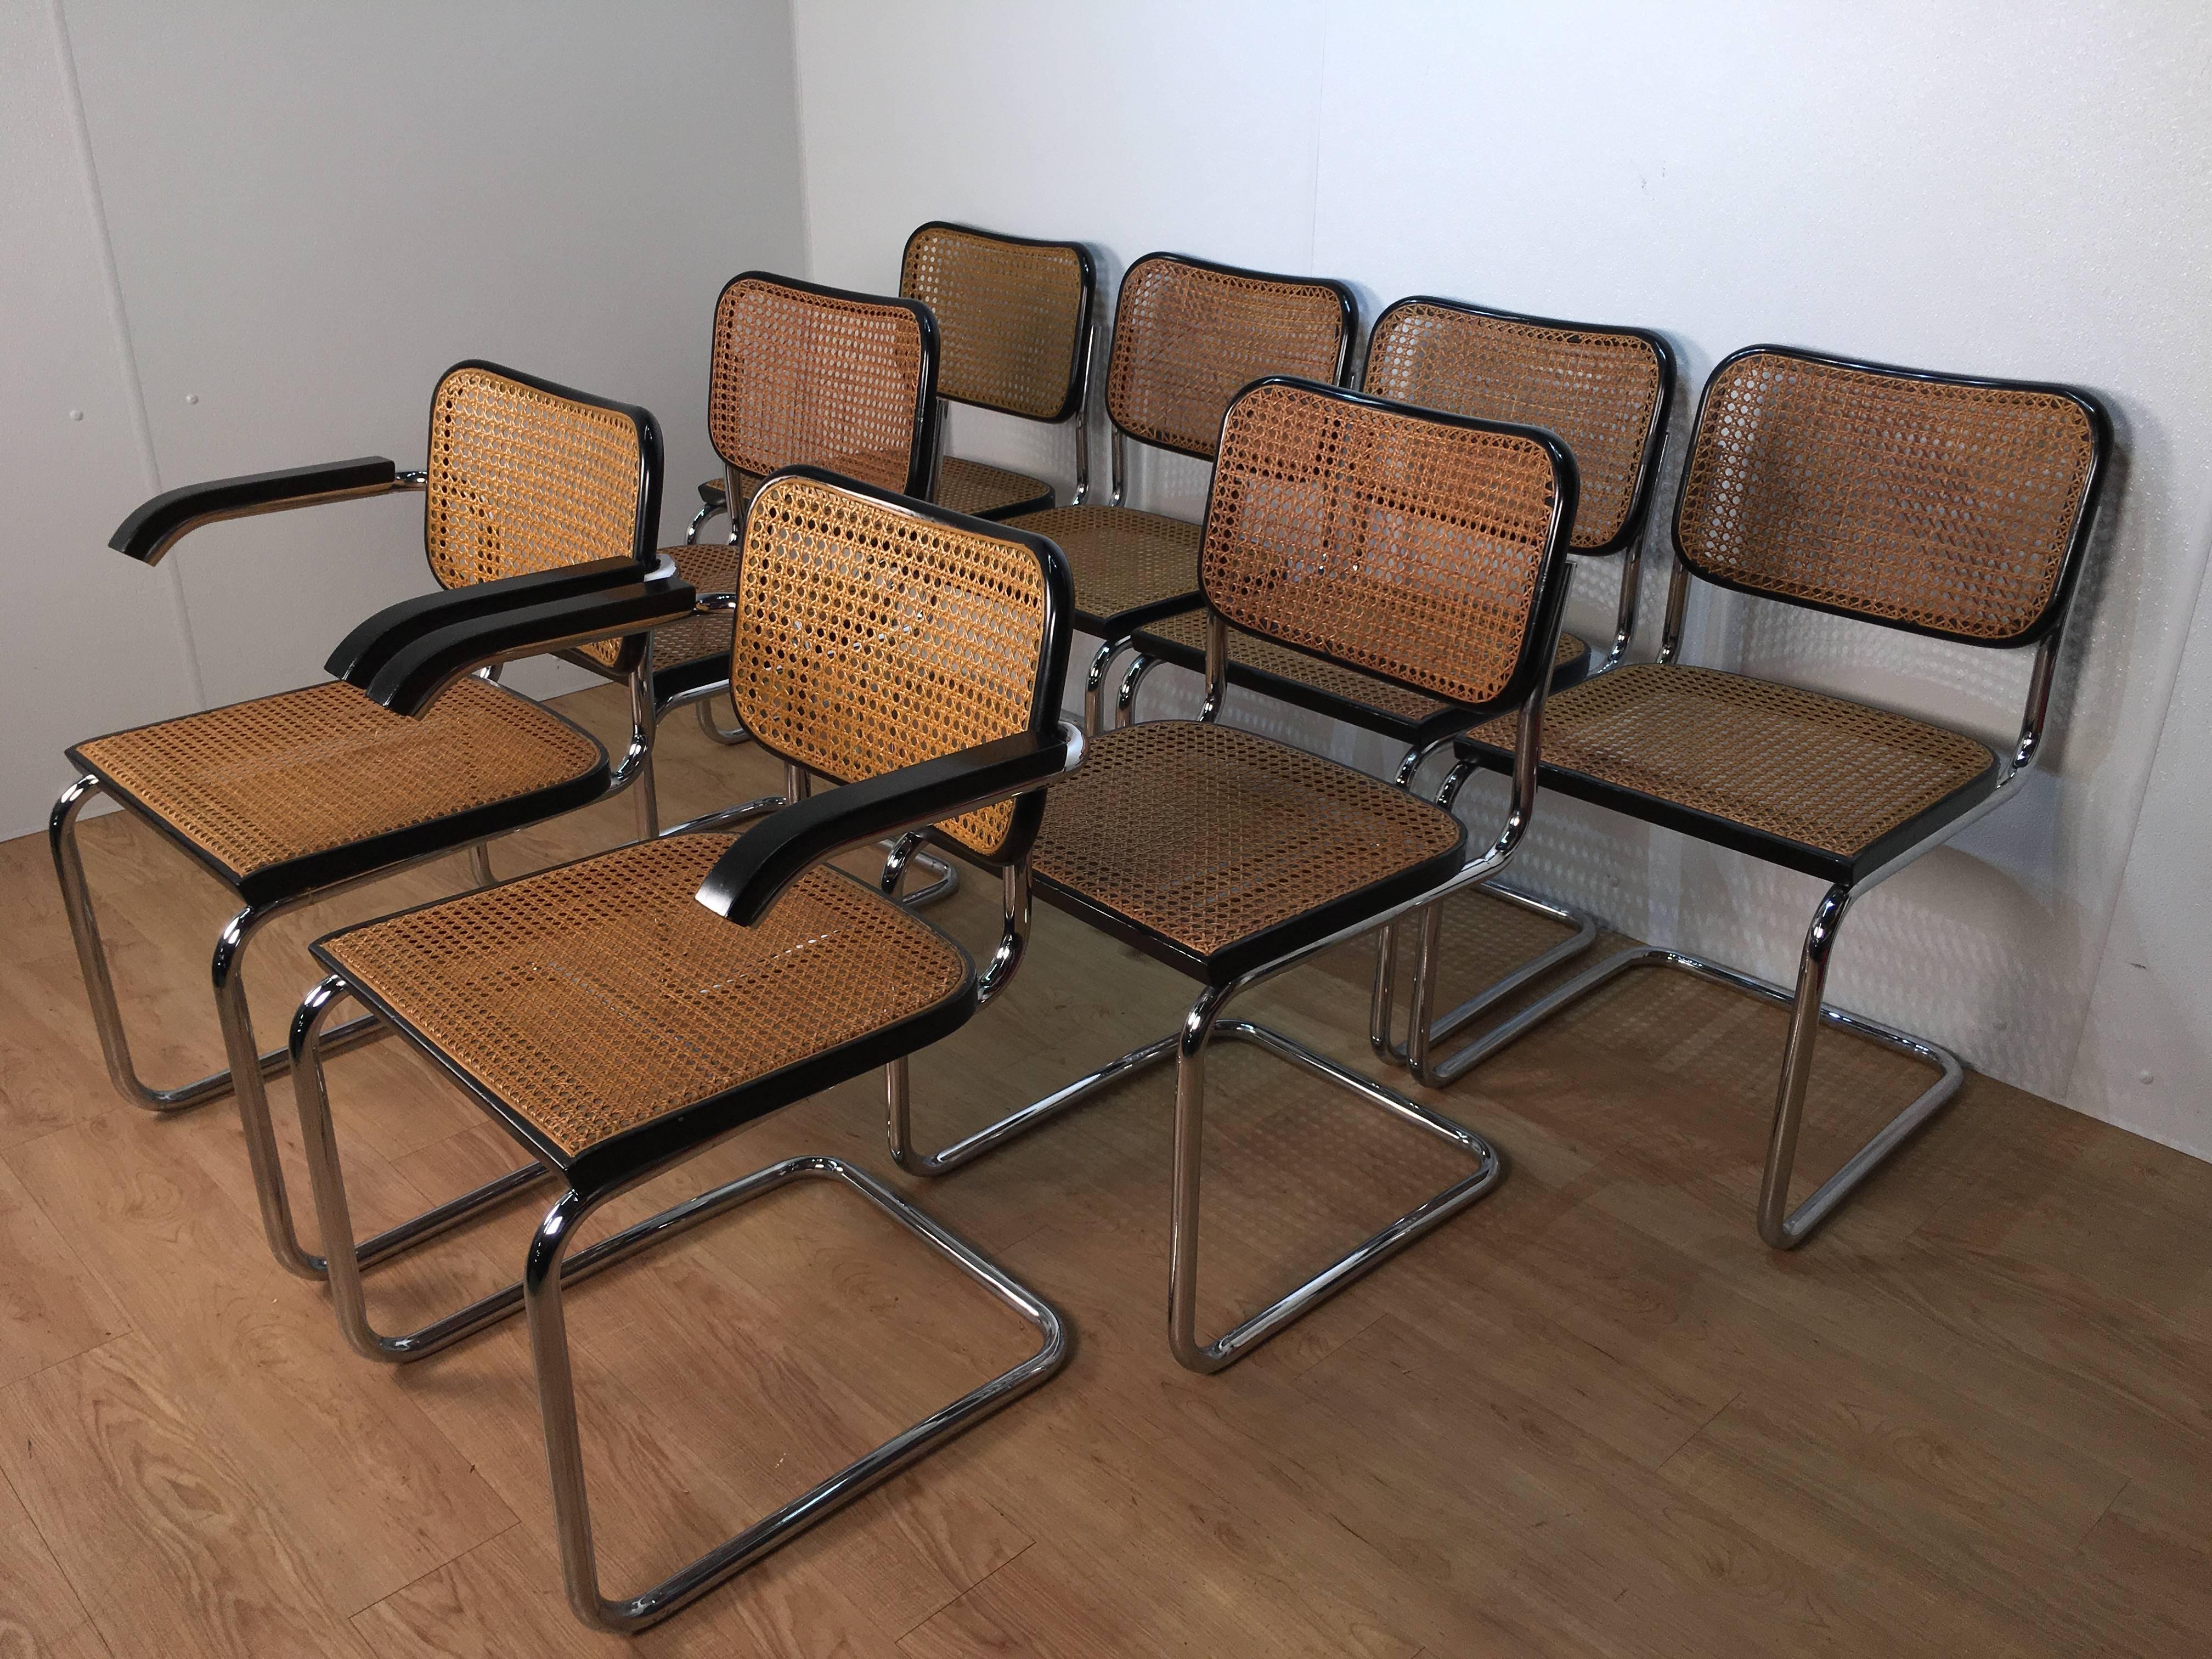 Handsome set of eight cesca chairs designed by Marcel Breuer. Produced by Gavina for Knoll International and includes original labels. Chrome and black ebonized frames are in excellent vintage condition. Presents beautifully.
Armchair measures